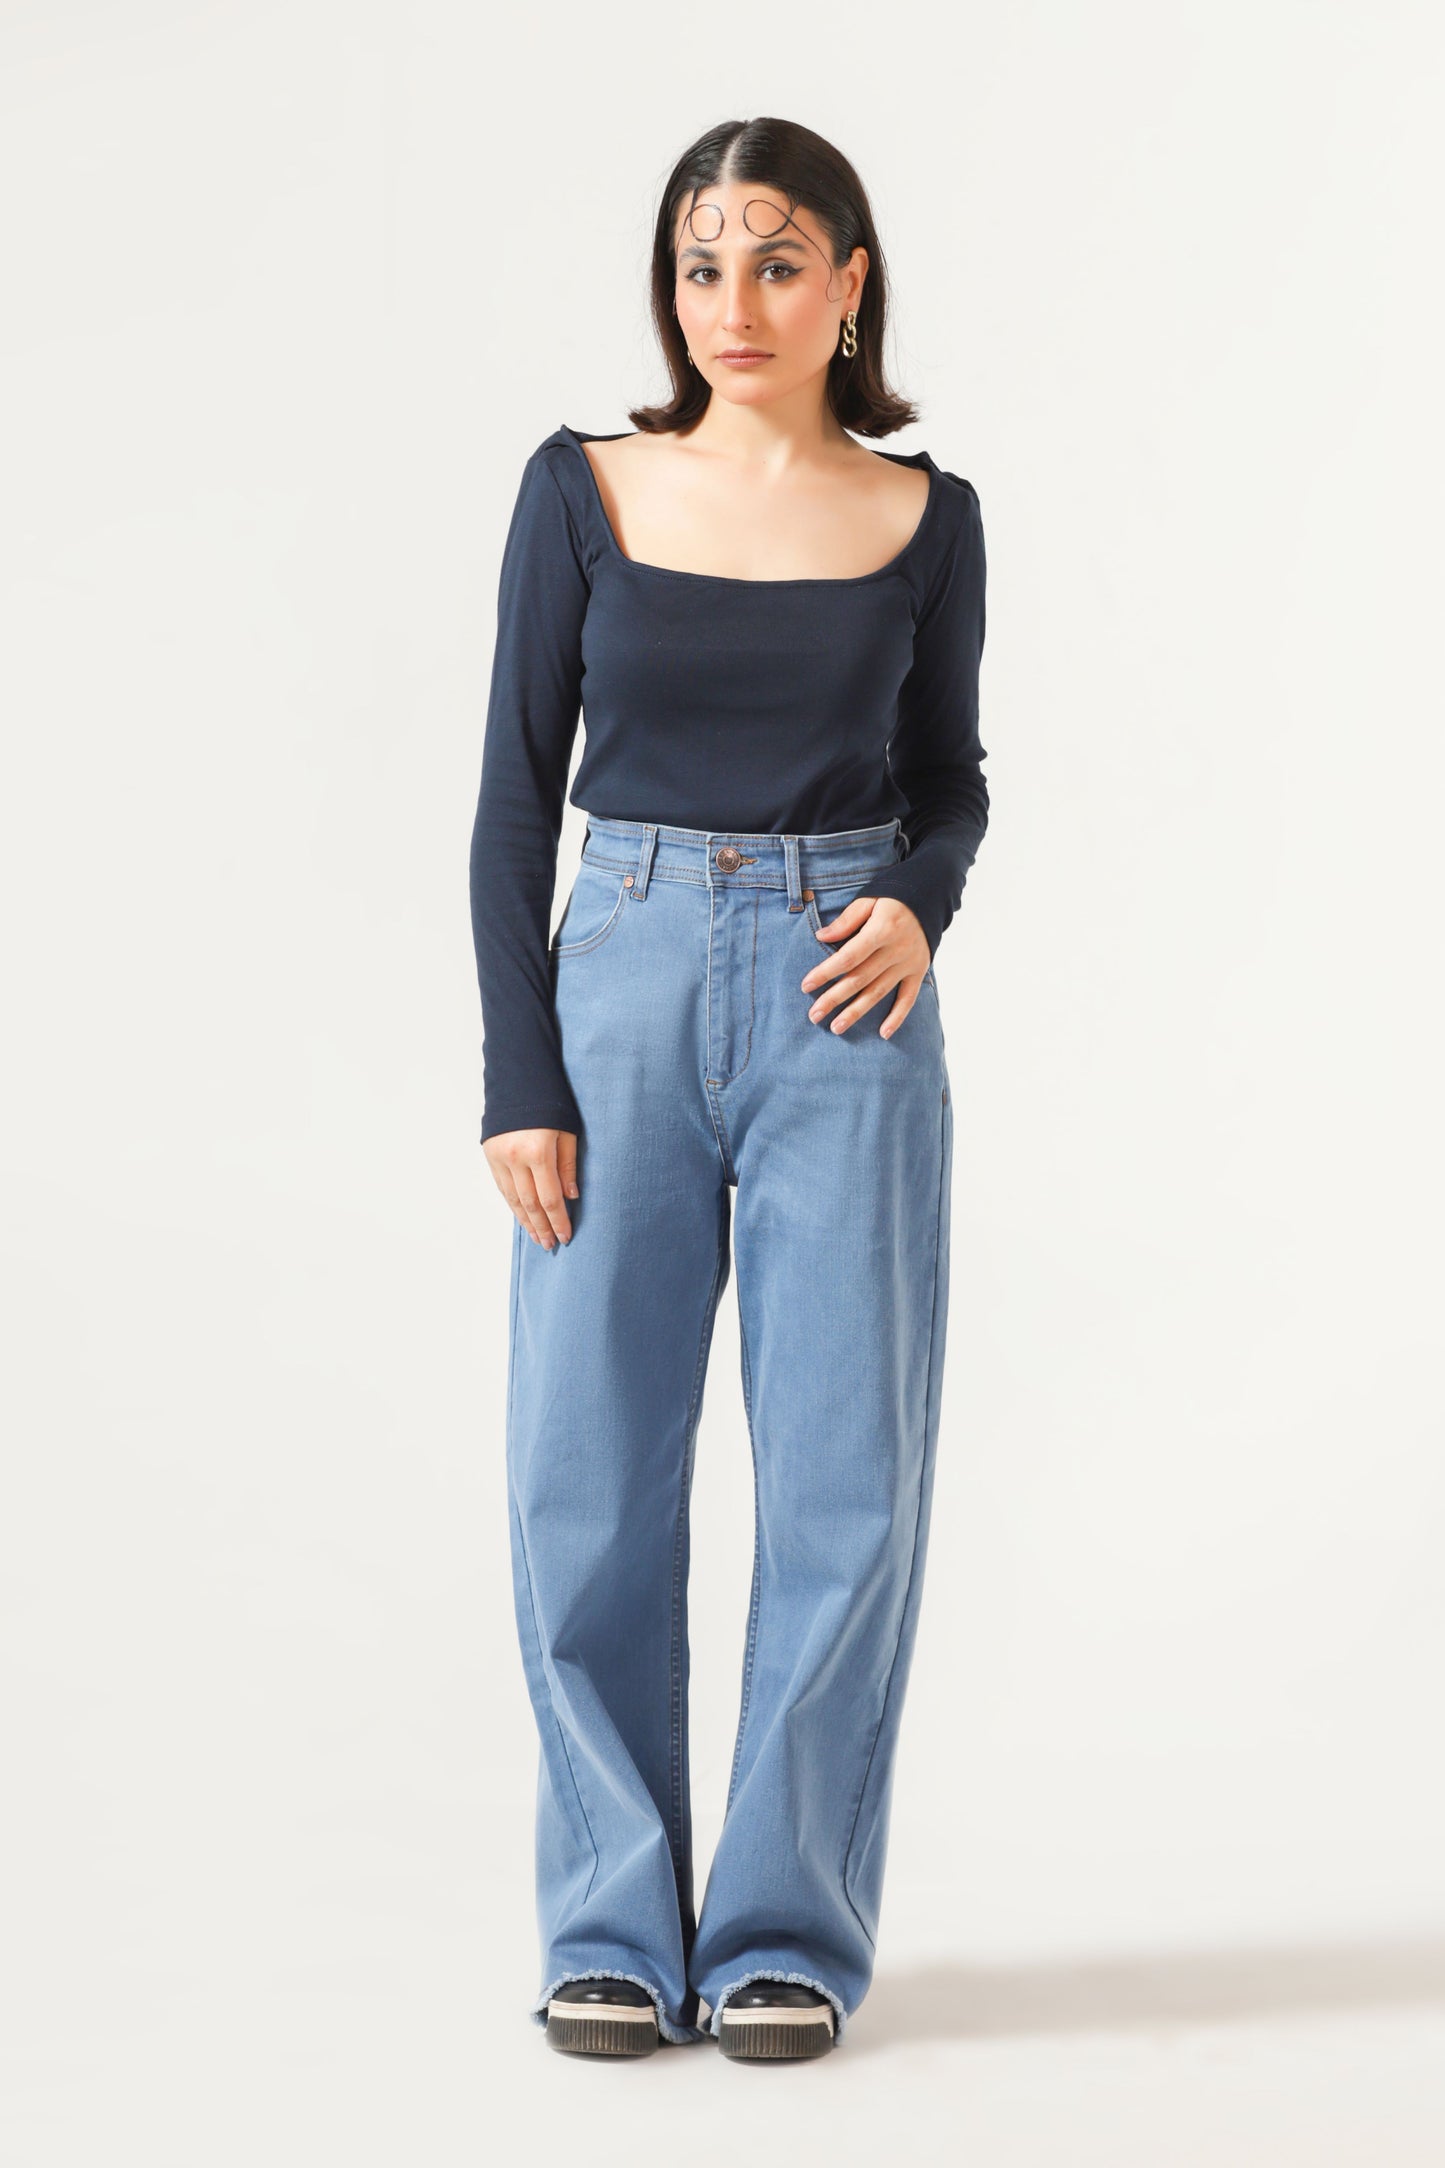 Culottes Jean in Ice Blue